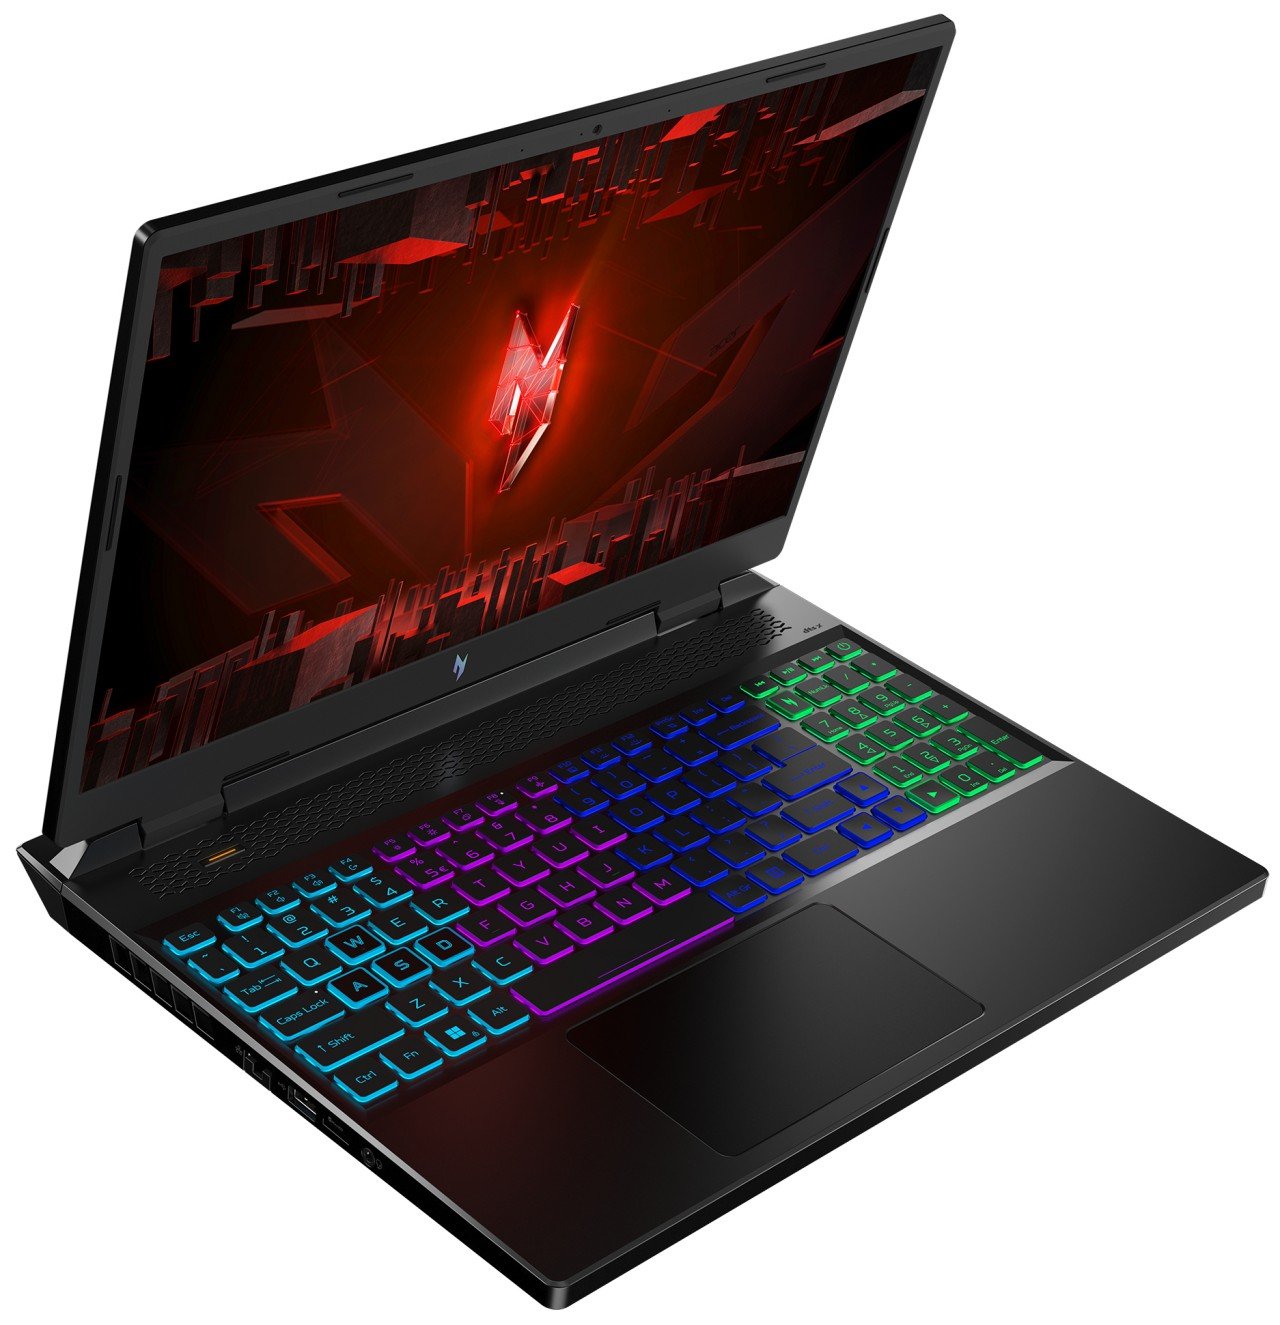 Acer's new Predator laptops have mini-LED displays and RTX 40